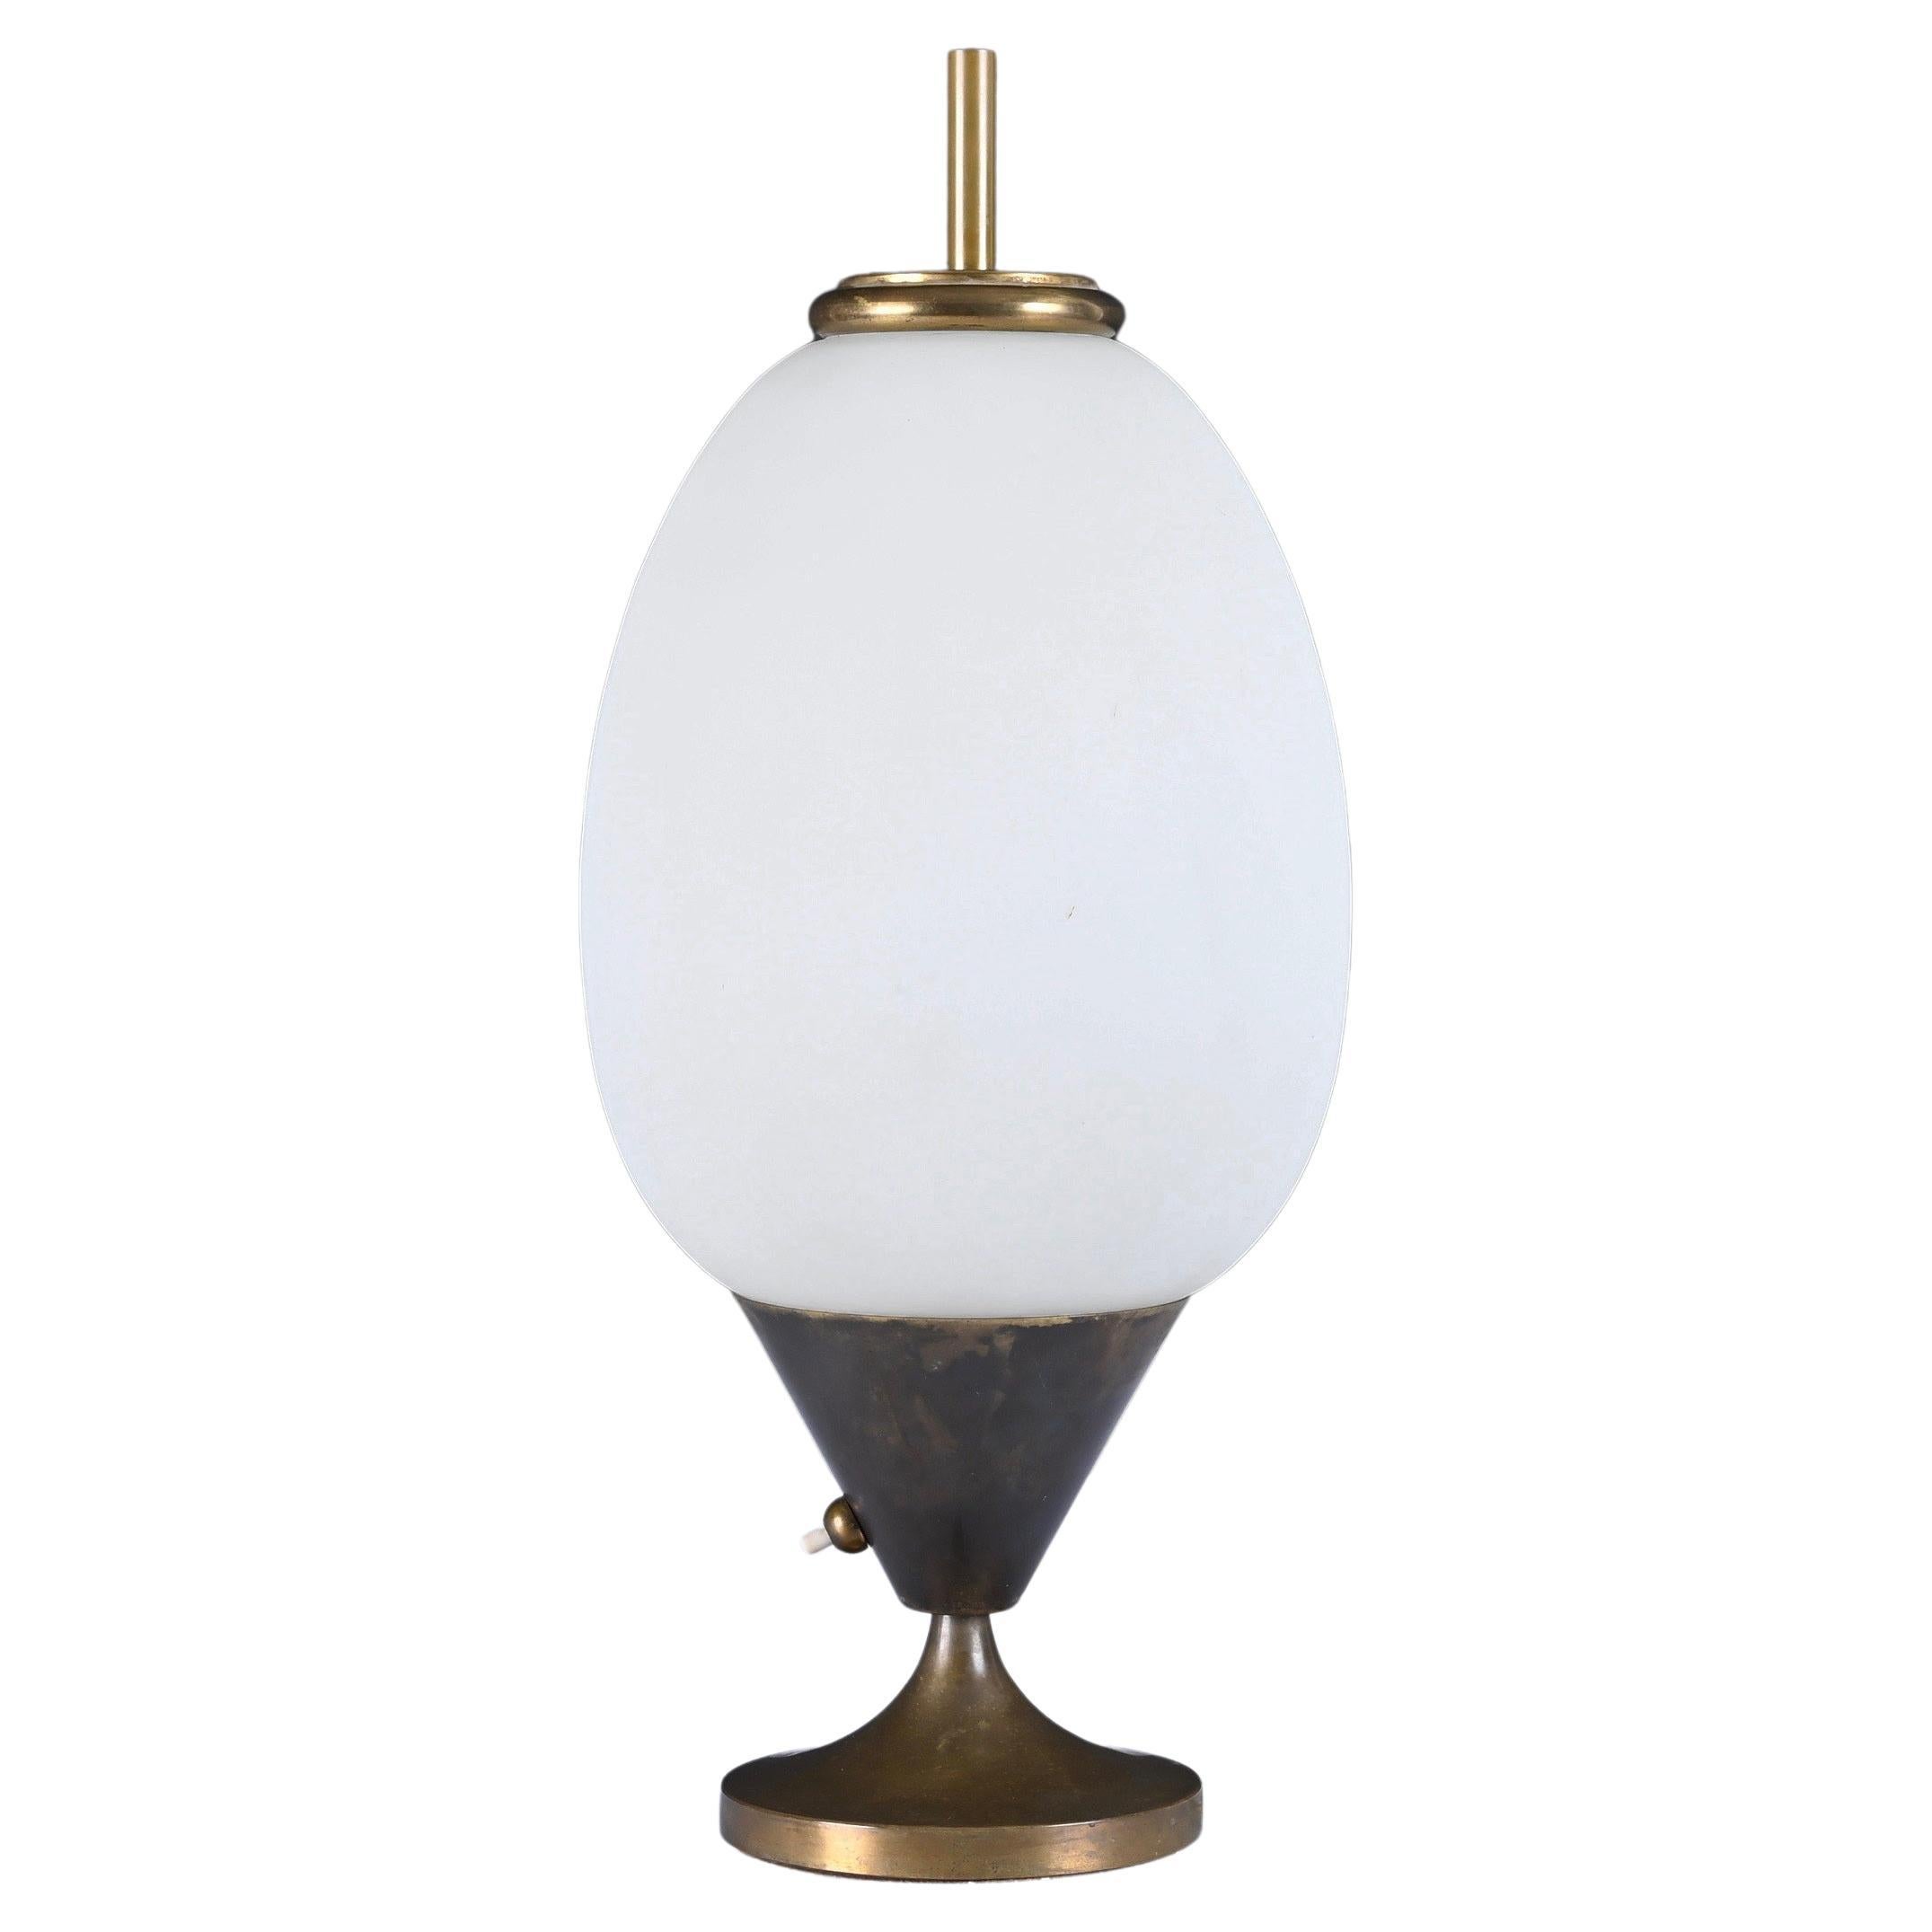 Mid-Century Modern Brass and Opaline Glass Egg-Shaped Italian Table Lamp, 1950s For Sale